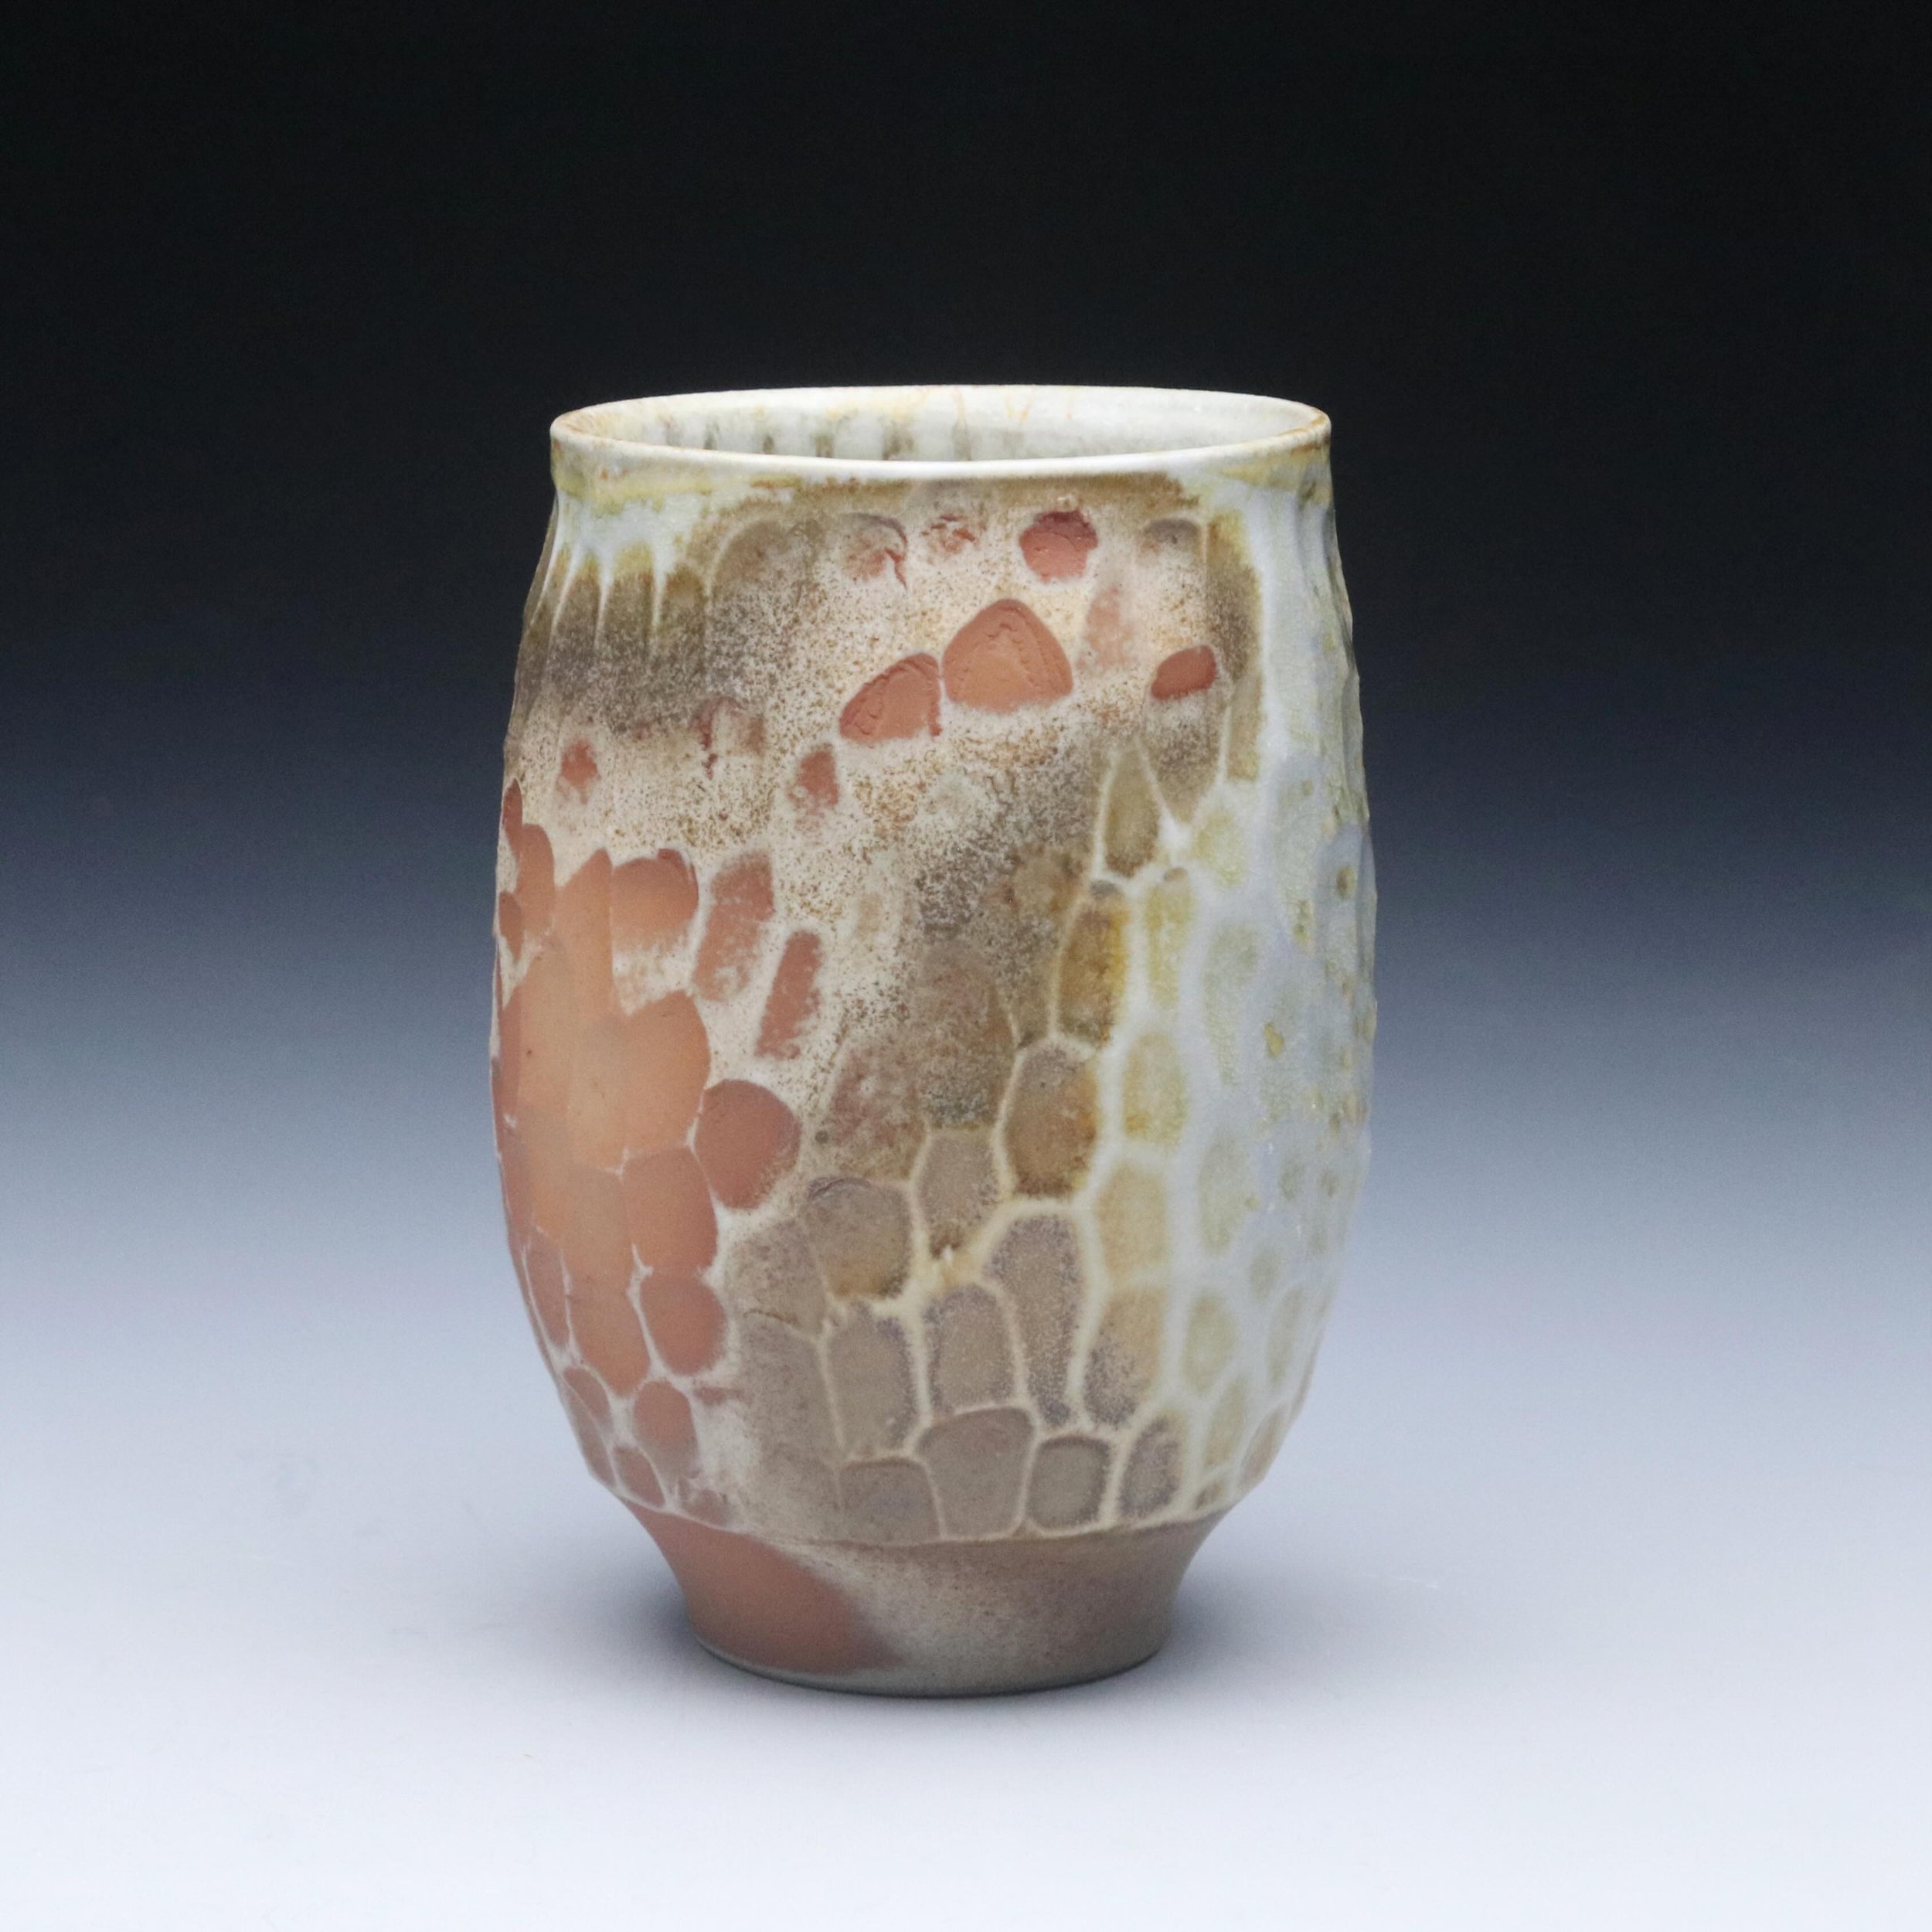 Here&rsquo;s a cup, or yunomi, I made. It was inspired by morel mushrooms! 🍄 I love morels. They have the best texture, in my opinion! 

This one has sold, but there are plenty of lovely pots still available in my online shop. I get orders packed up